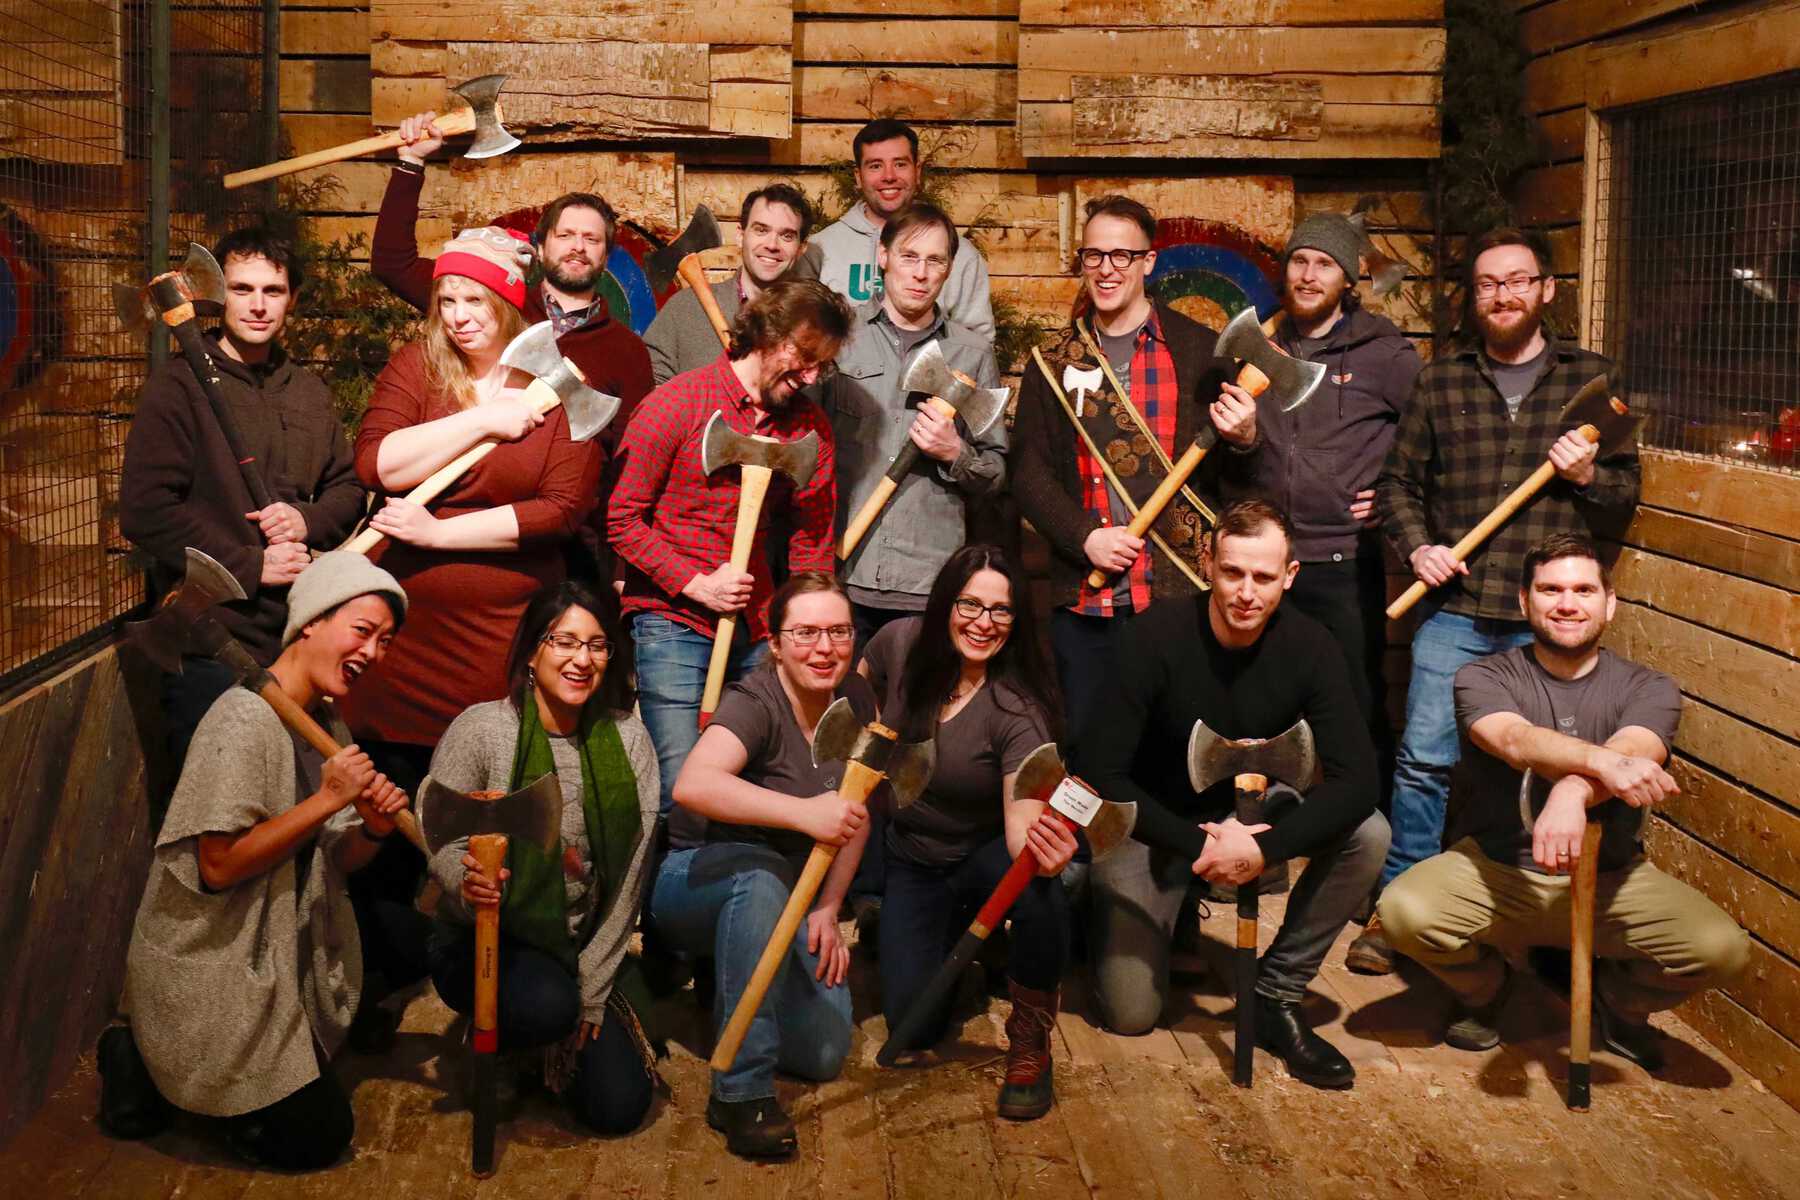 Group posing with throwing-axes